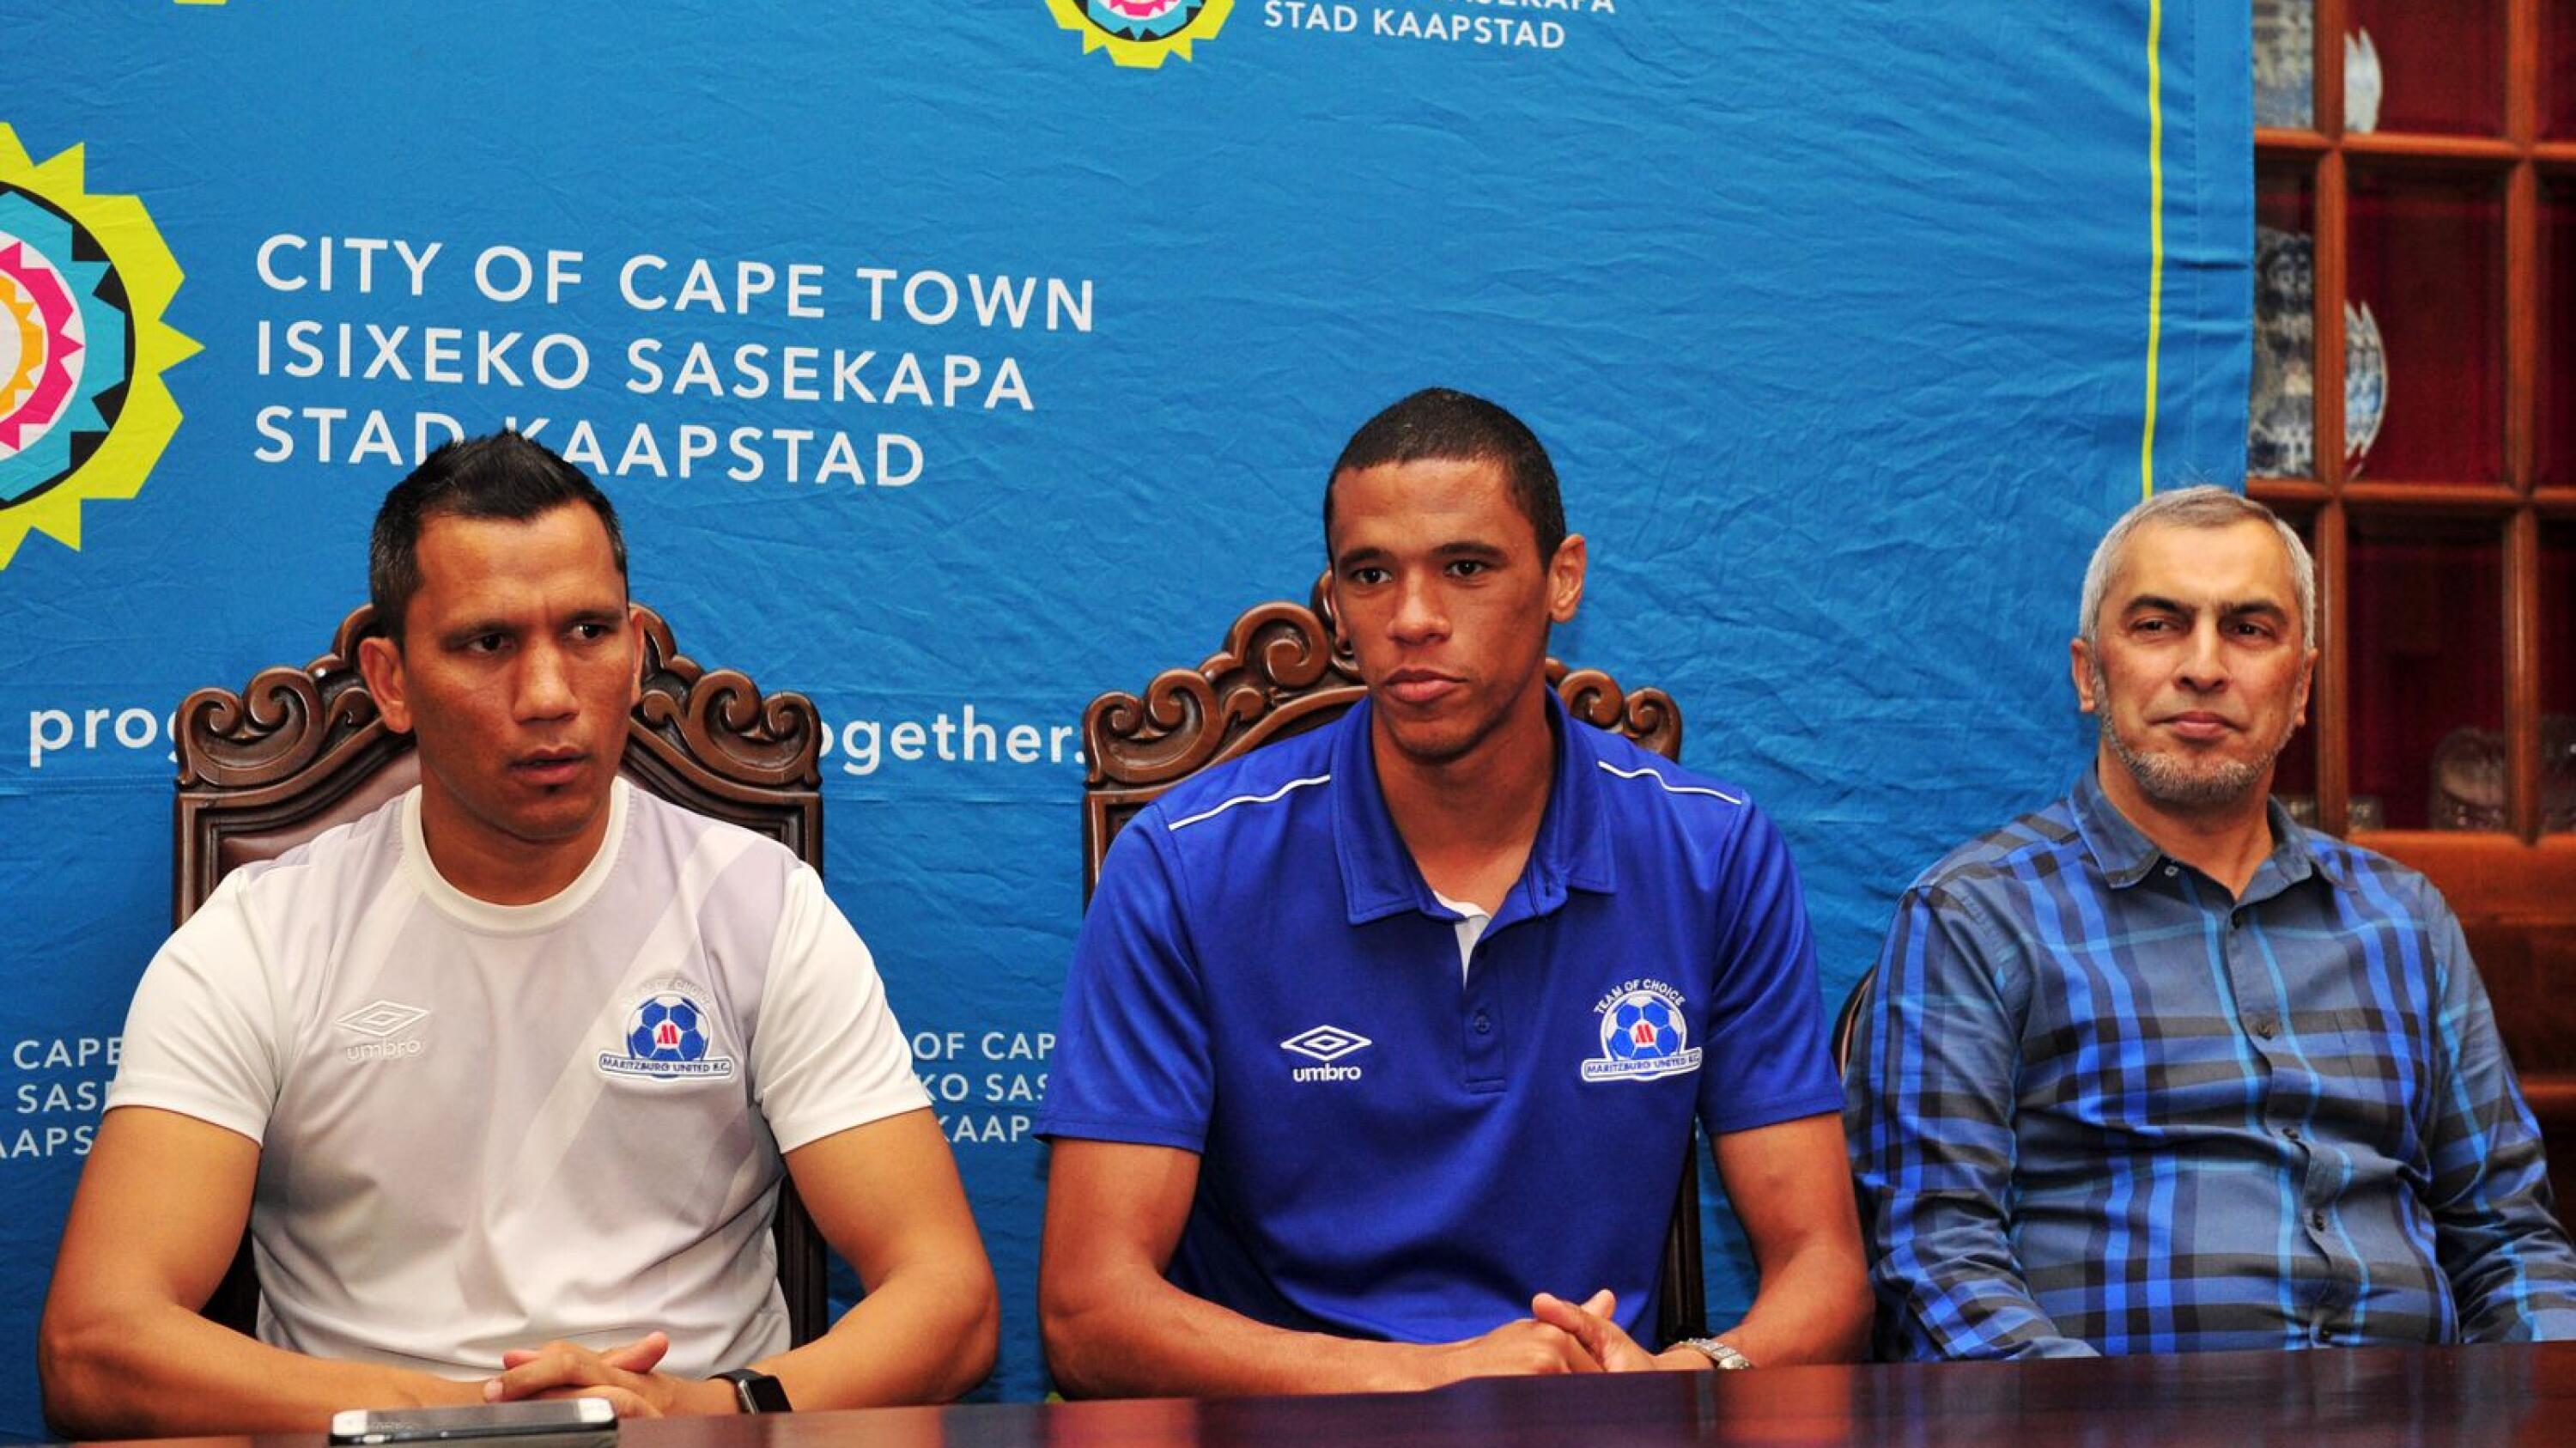 Bevan Fransman of Maritzburg United, flanked by Fadlu Davids (left) and Maritzburg United Chairman Farook Kadodia (right) chats to media at City Hall during the Maritzburg United visit to Cape Town